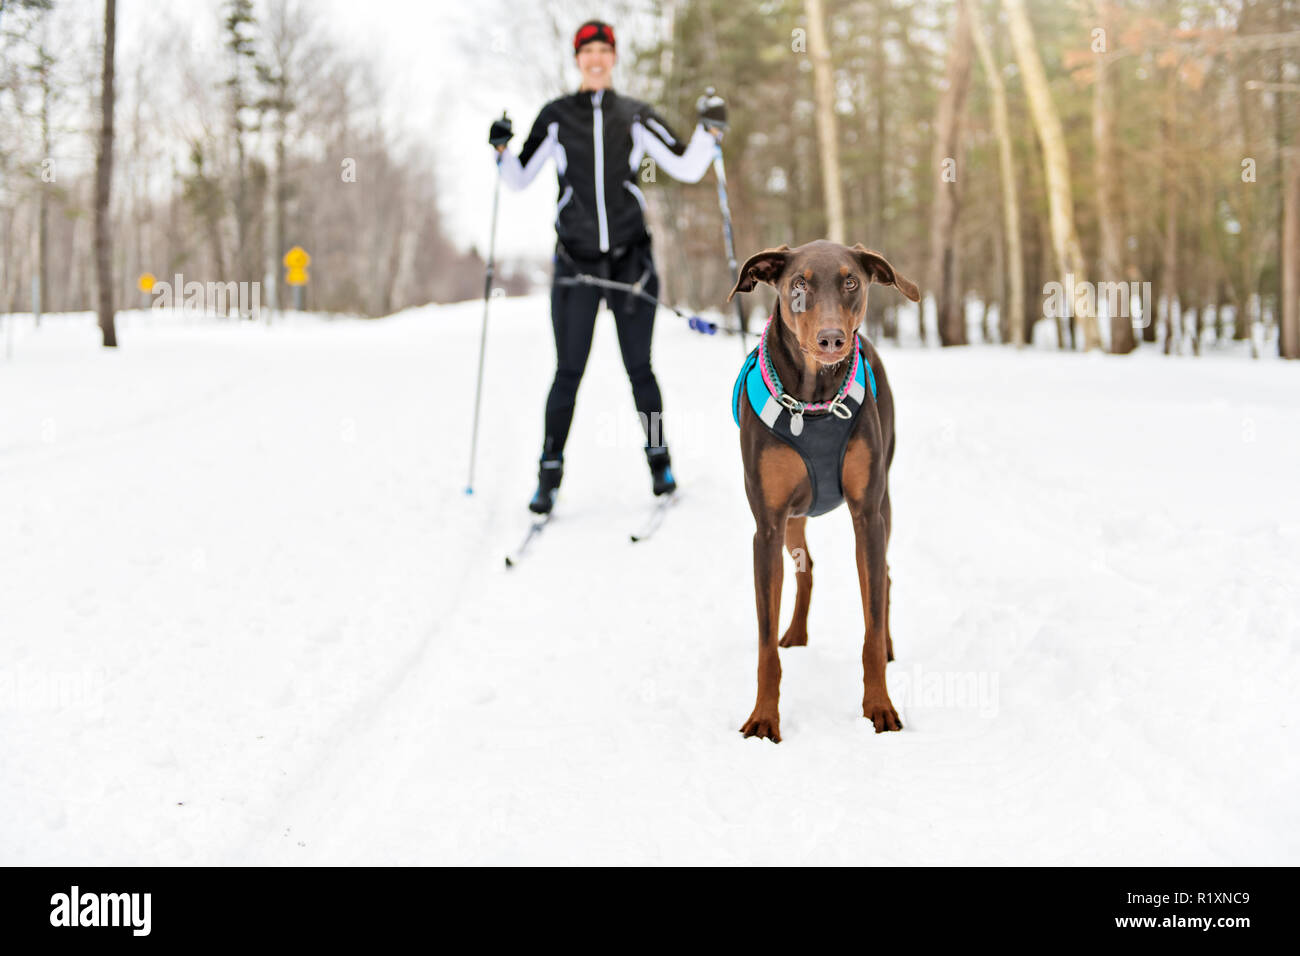 skijoring woman have fun in forest Stock Photo